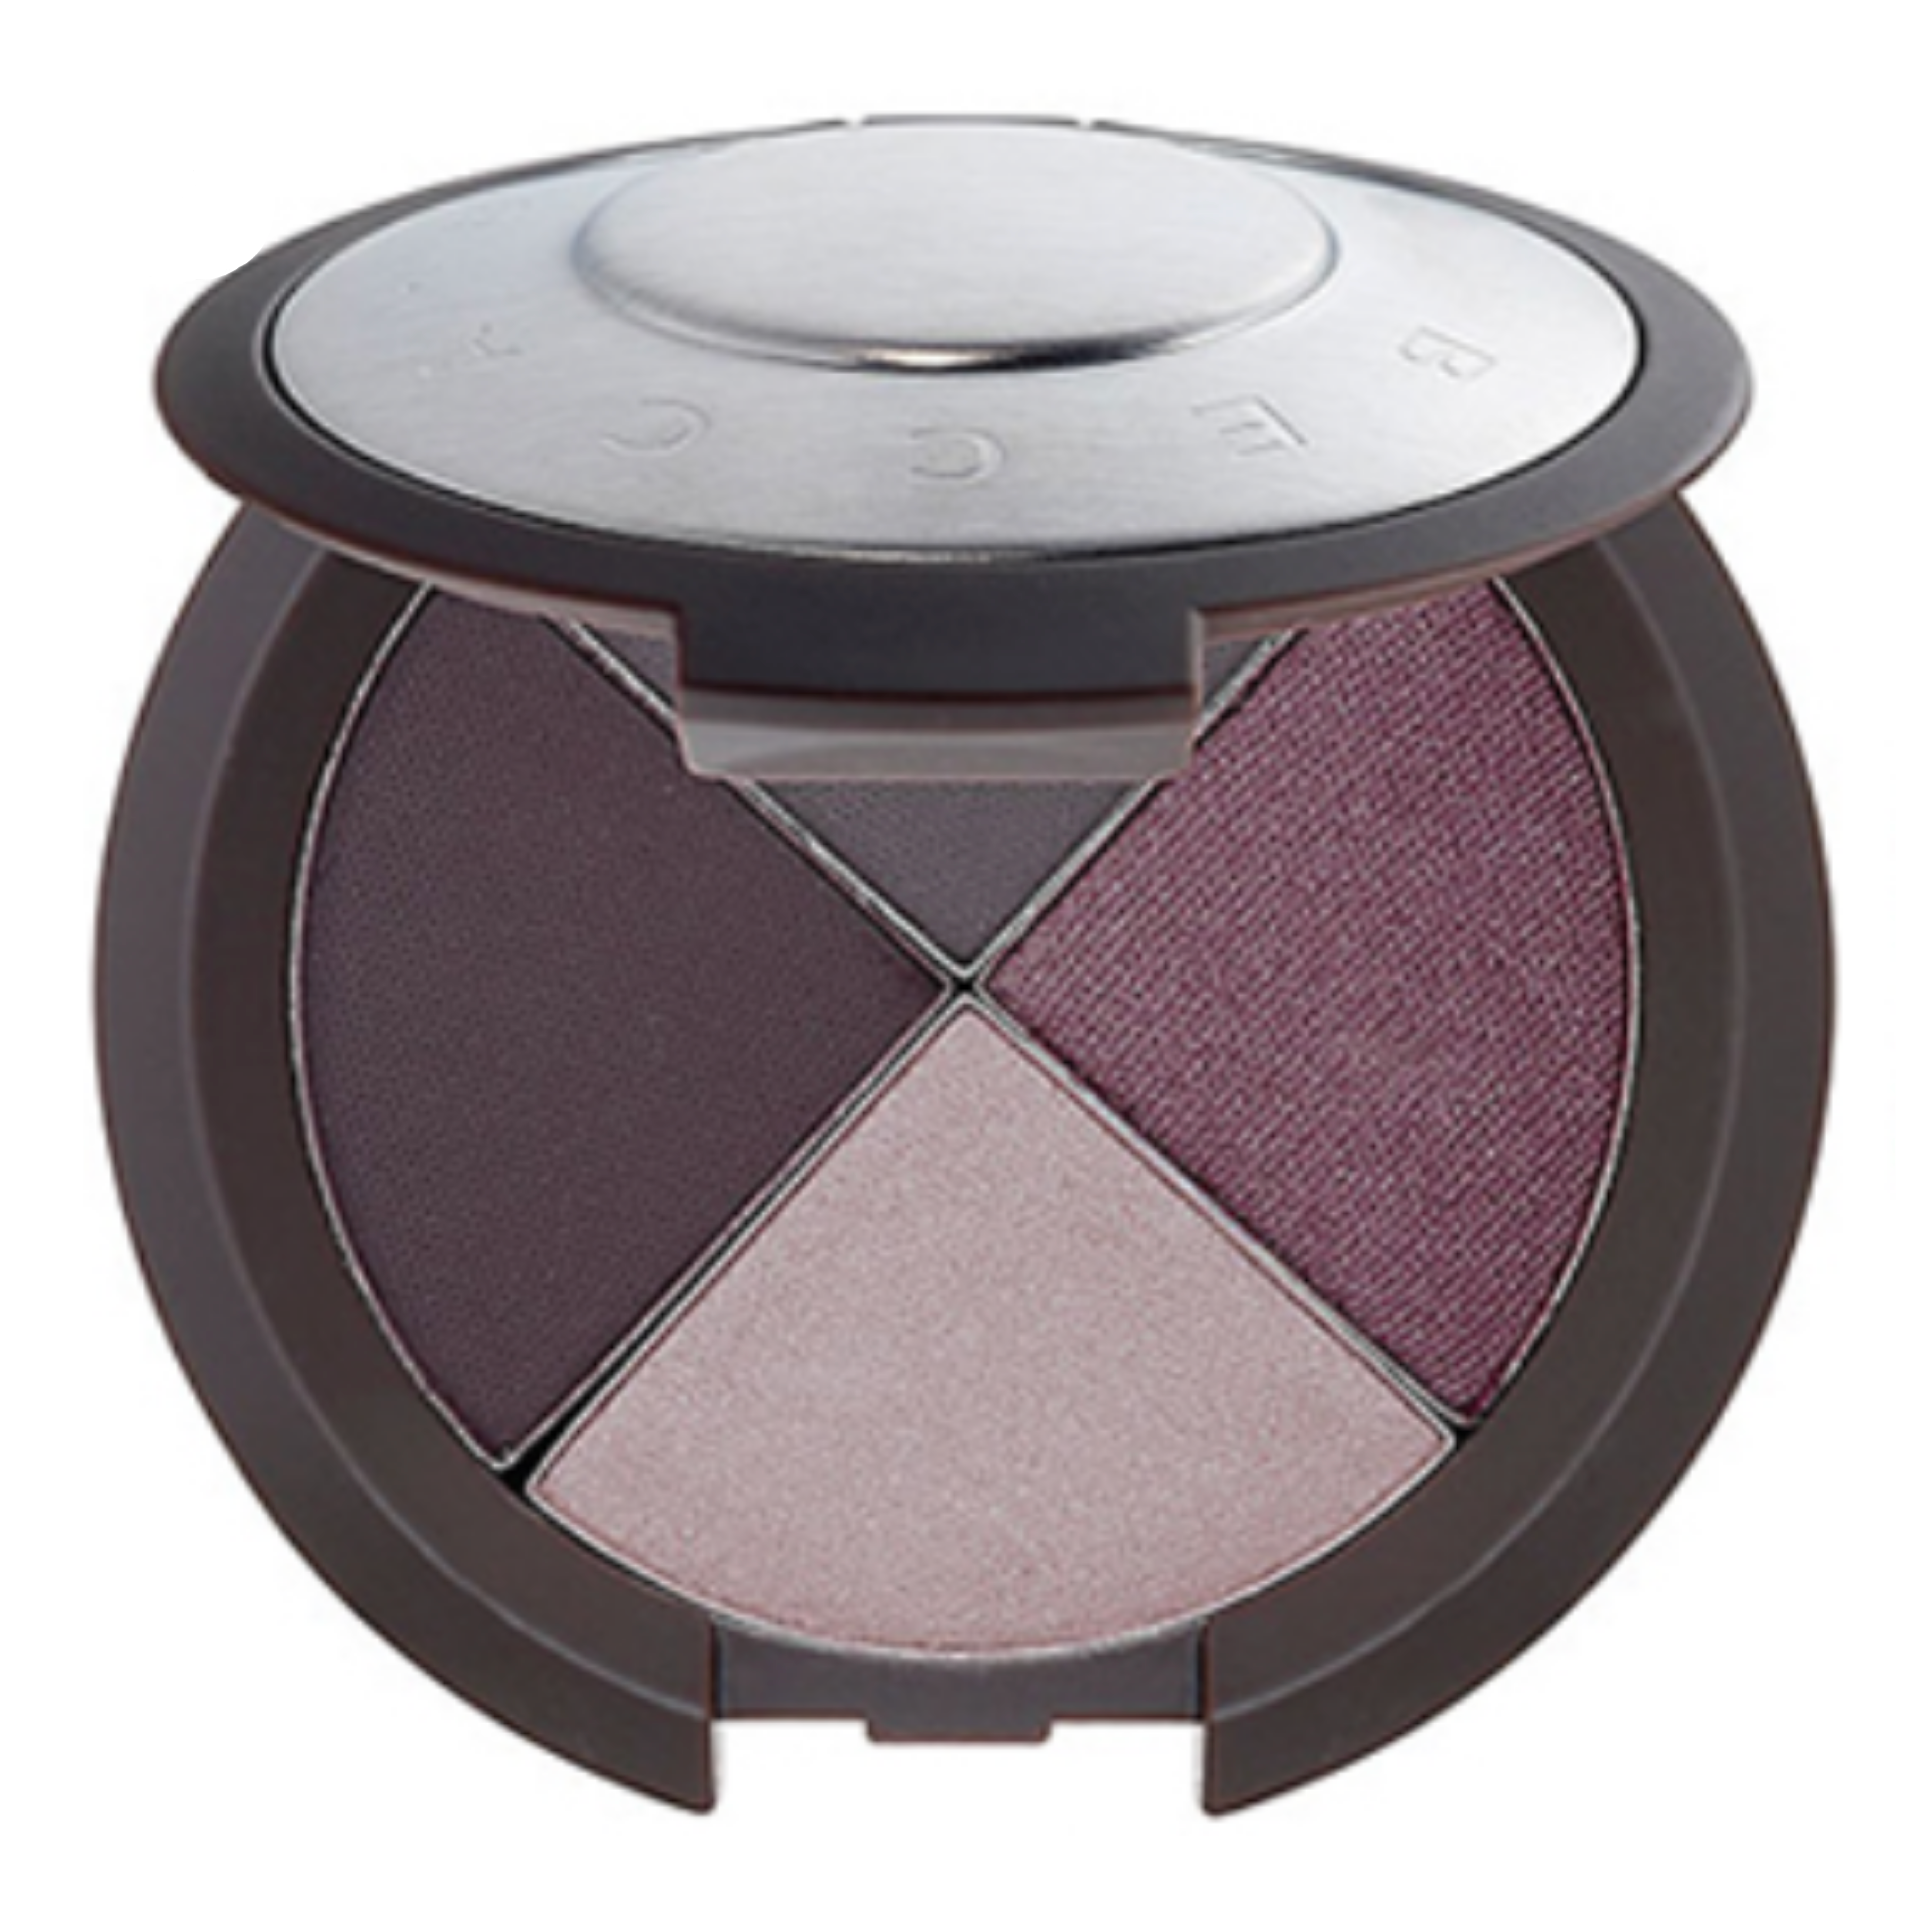 BECCA Smoke & Grace Collection Eye Quads - Astro Violet